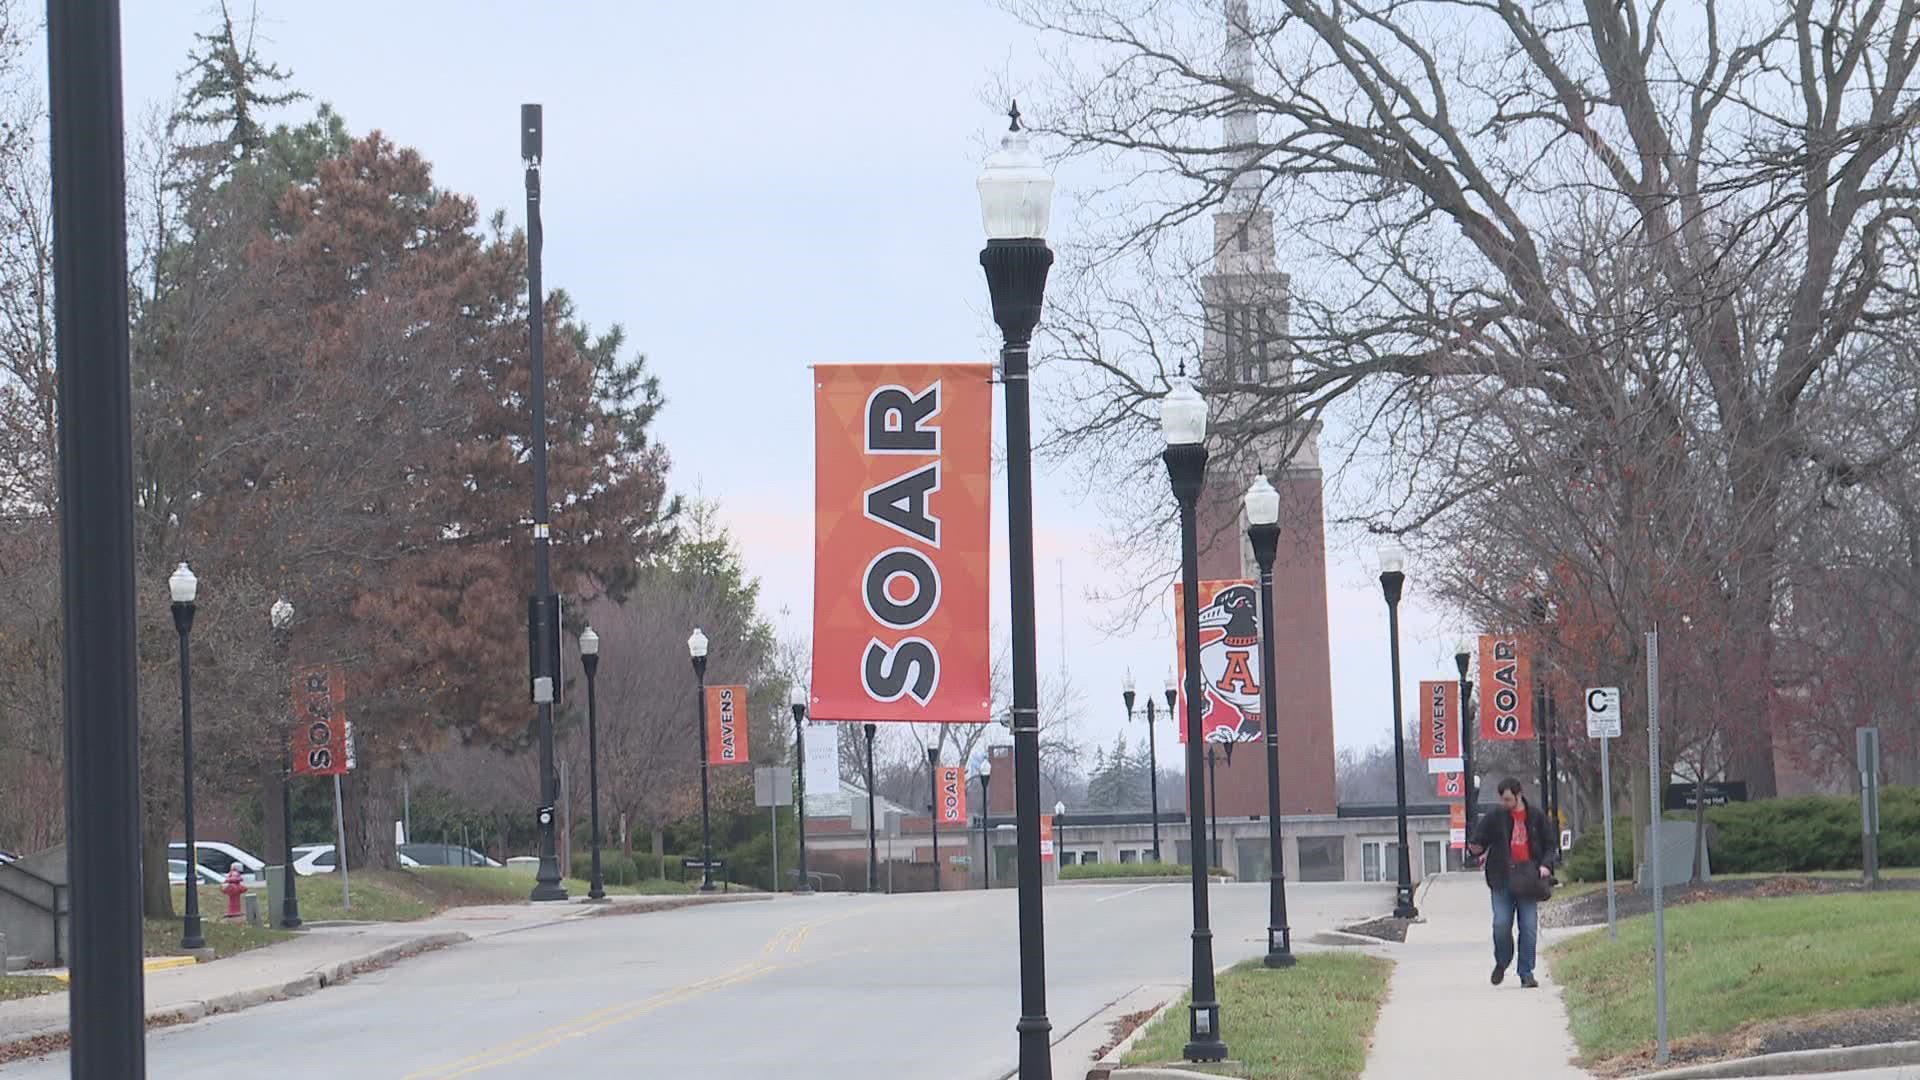 Winds of change are blowing across a number of college and university campuses around the Hoosier state.